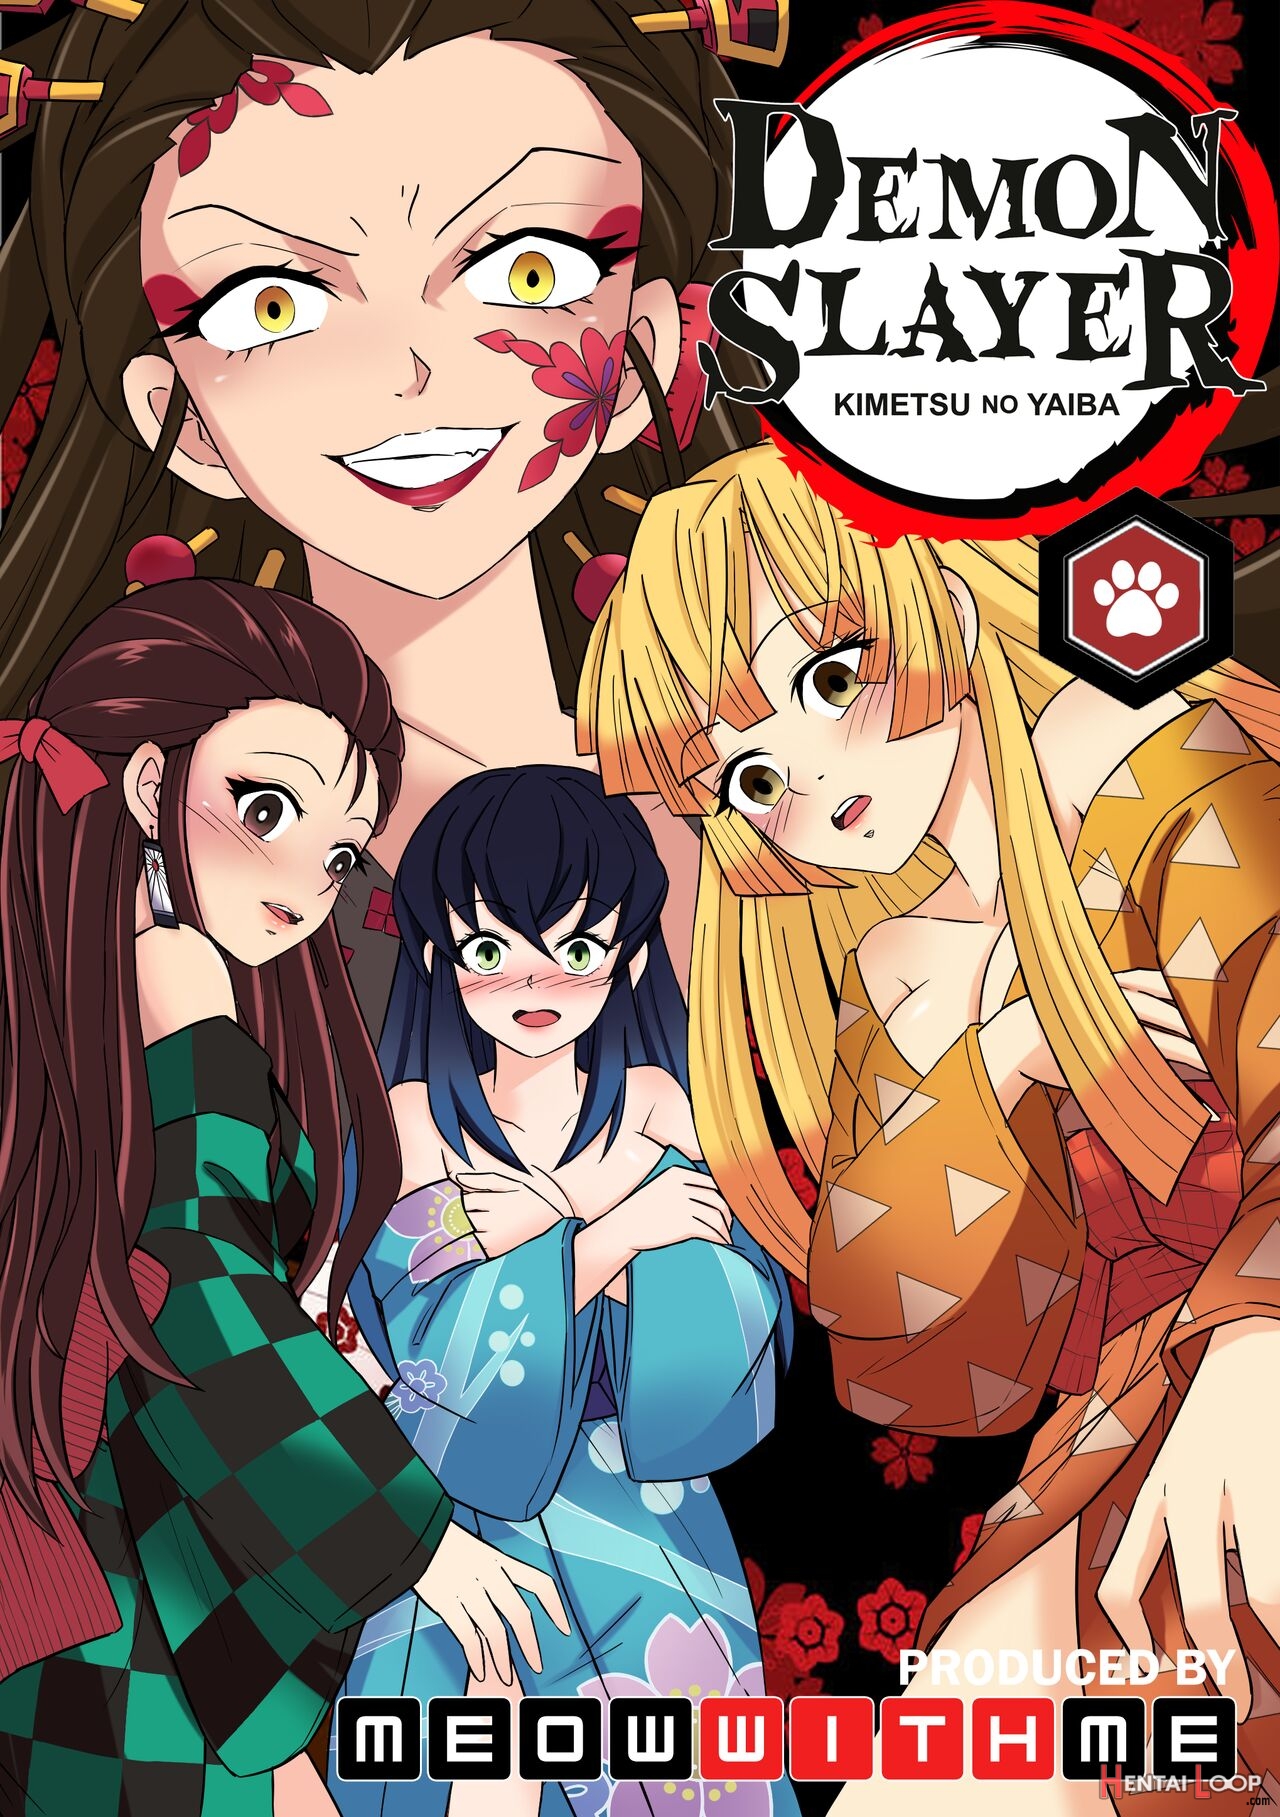 Kimetsu No Yaiba: Red Light District (by Meowwithme) - Hentai doujinshi for  free at HentaiLoop